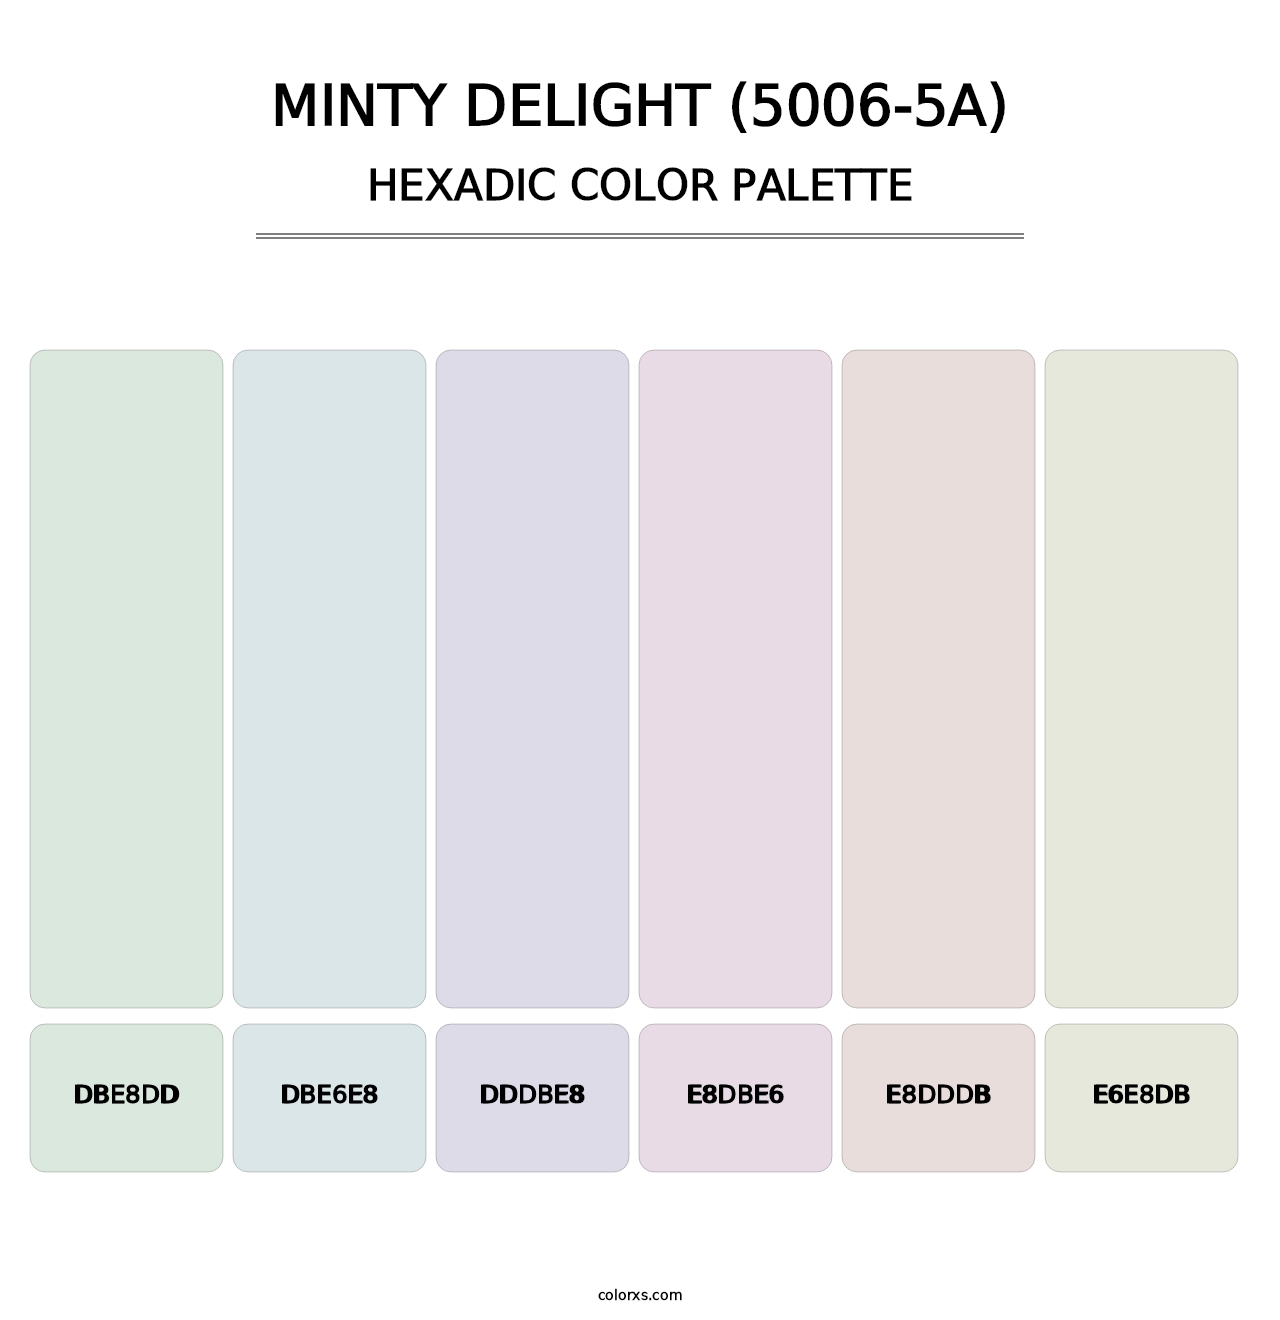 Minty Delight (5006-5A) - Hexadic Color Palette